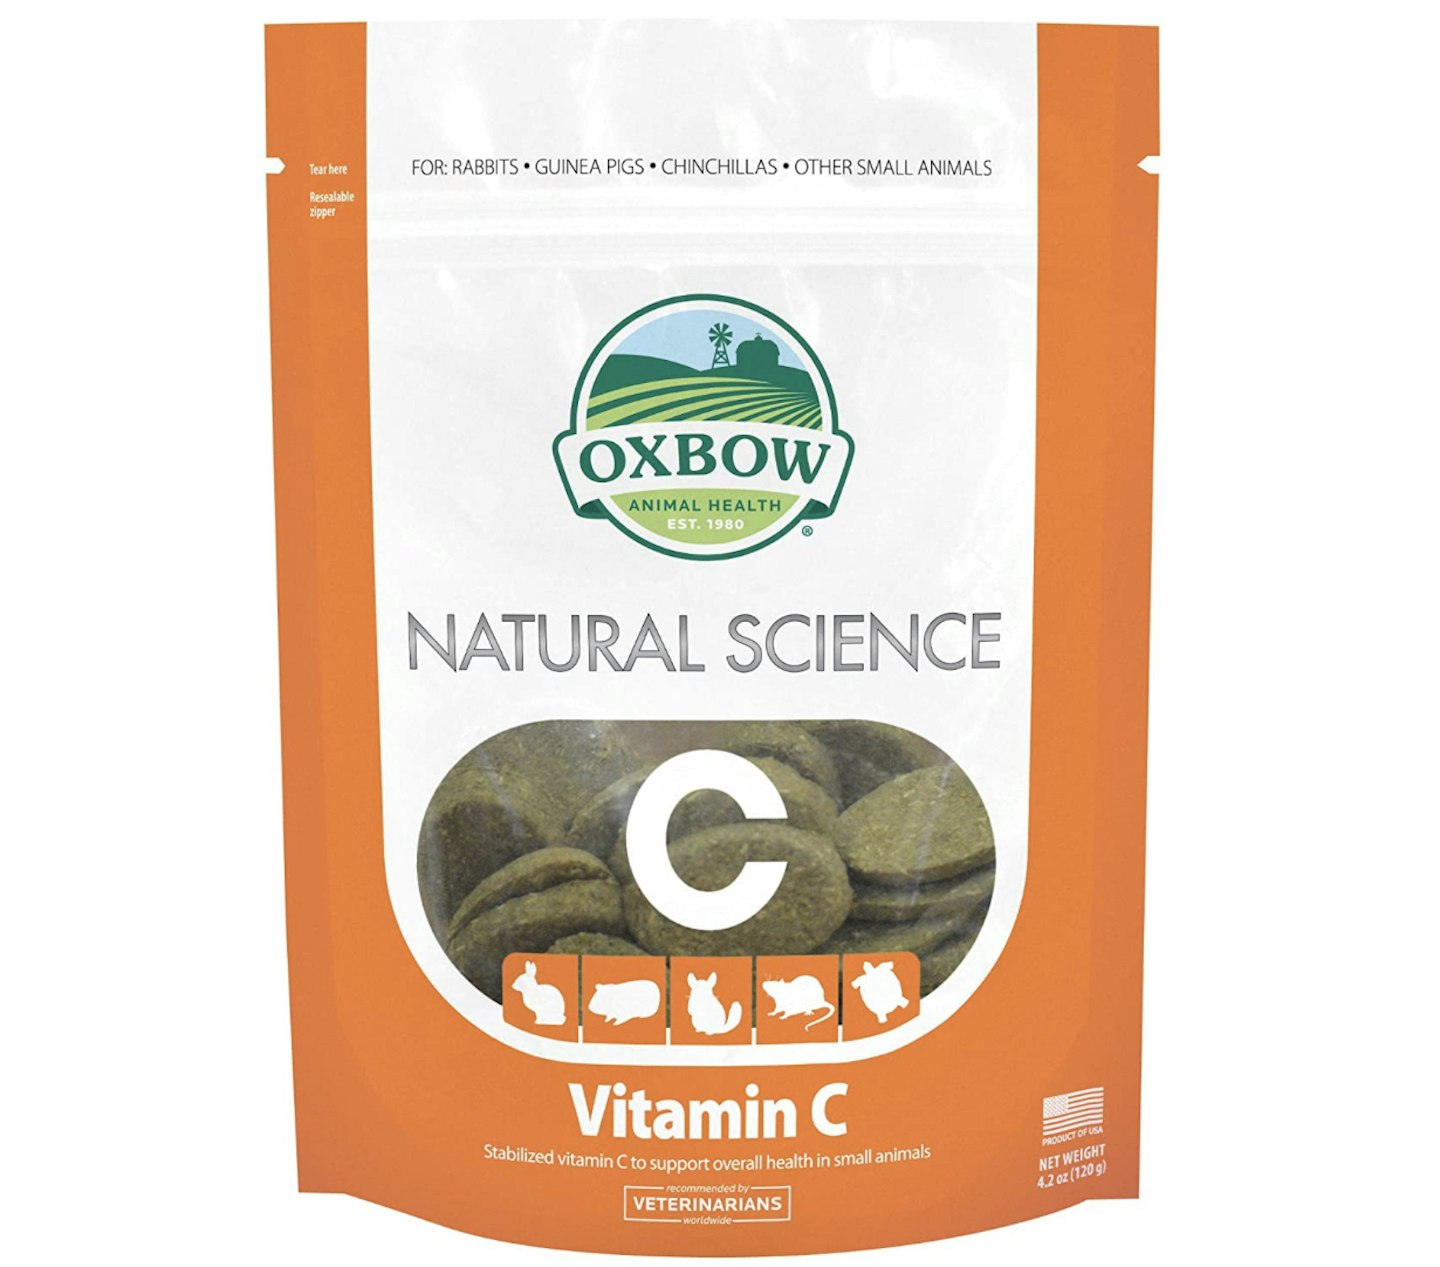 Oxbow Natural Science Vitamin C Supplement - Vitamin C for Guinea Pigs and other Small Animals, 4.2 oz.